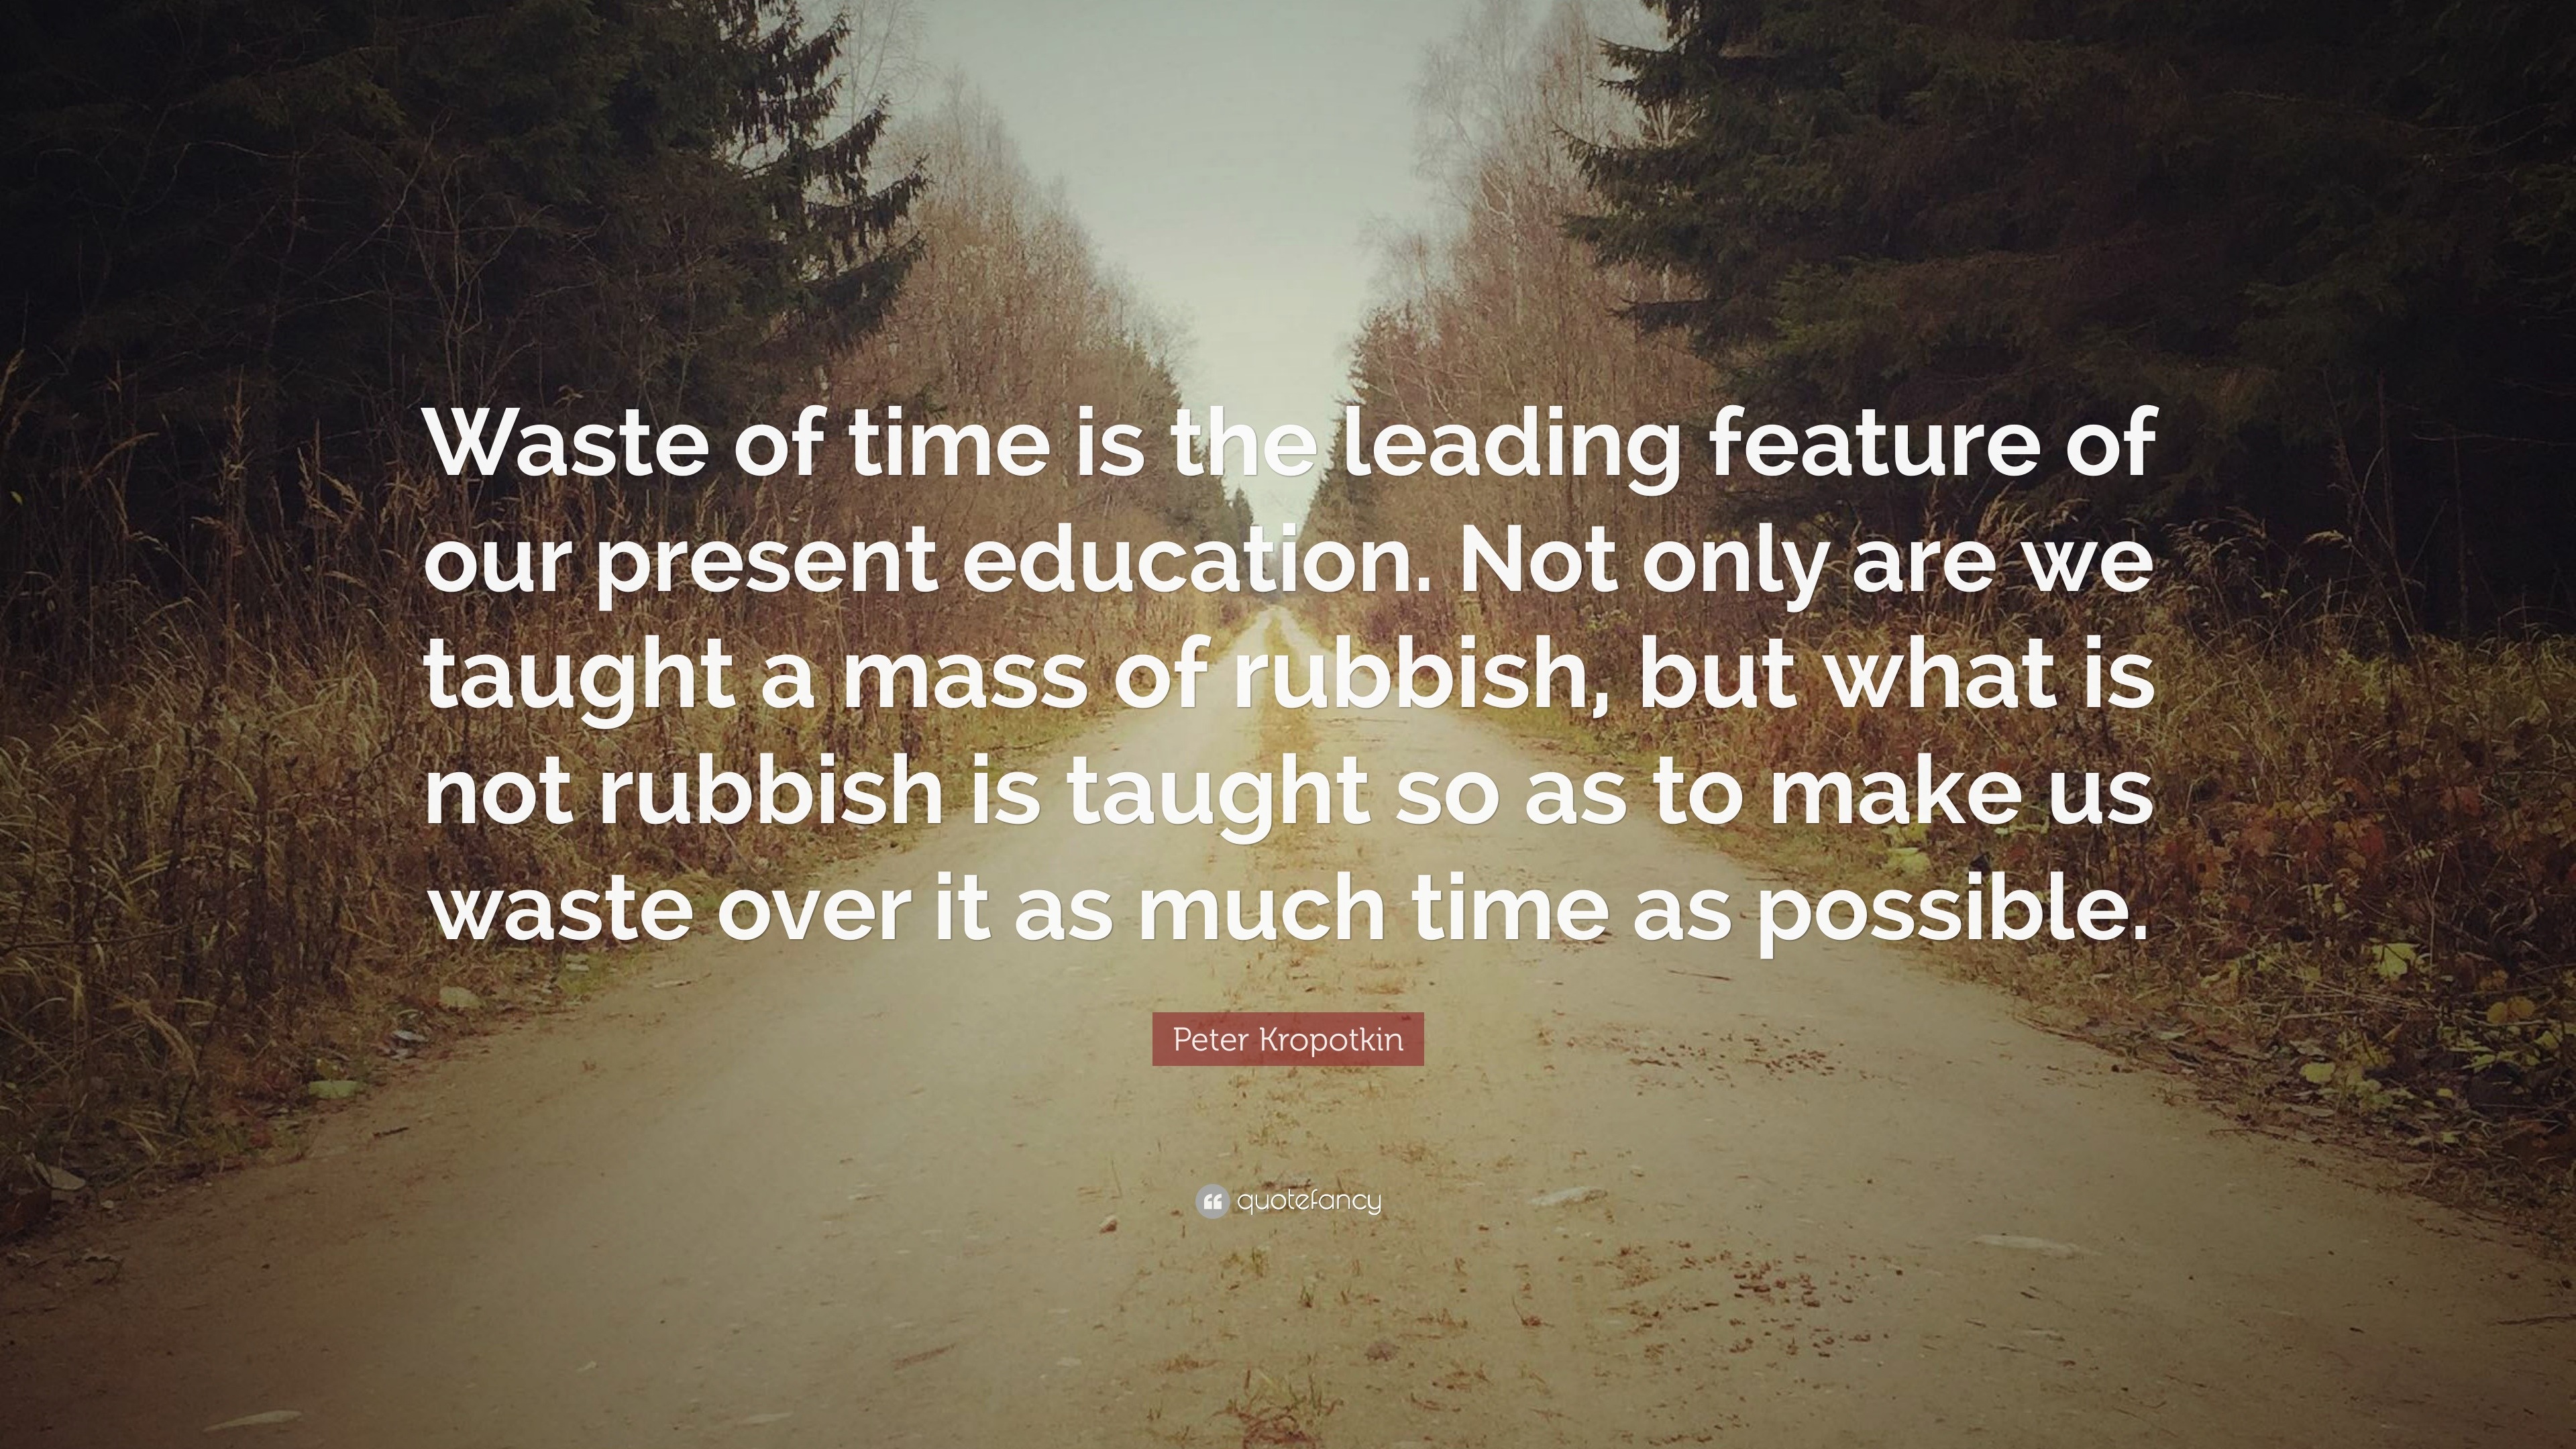 Peter Kropotkin Quote: “Waste of time is the leading feature of our